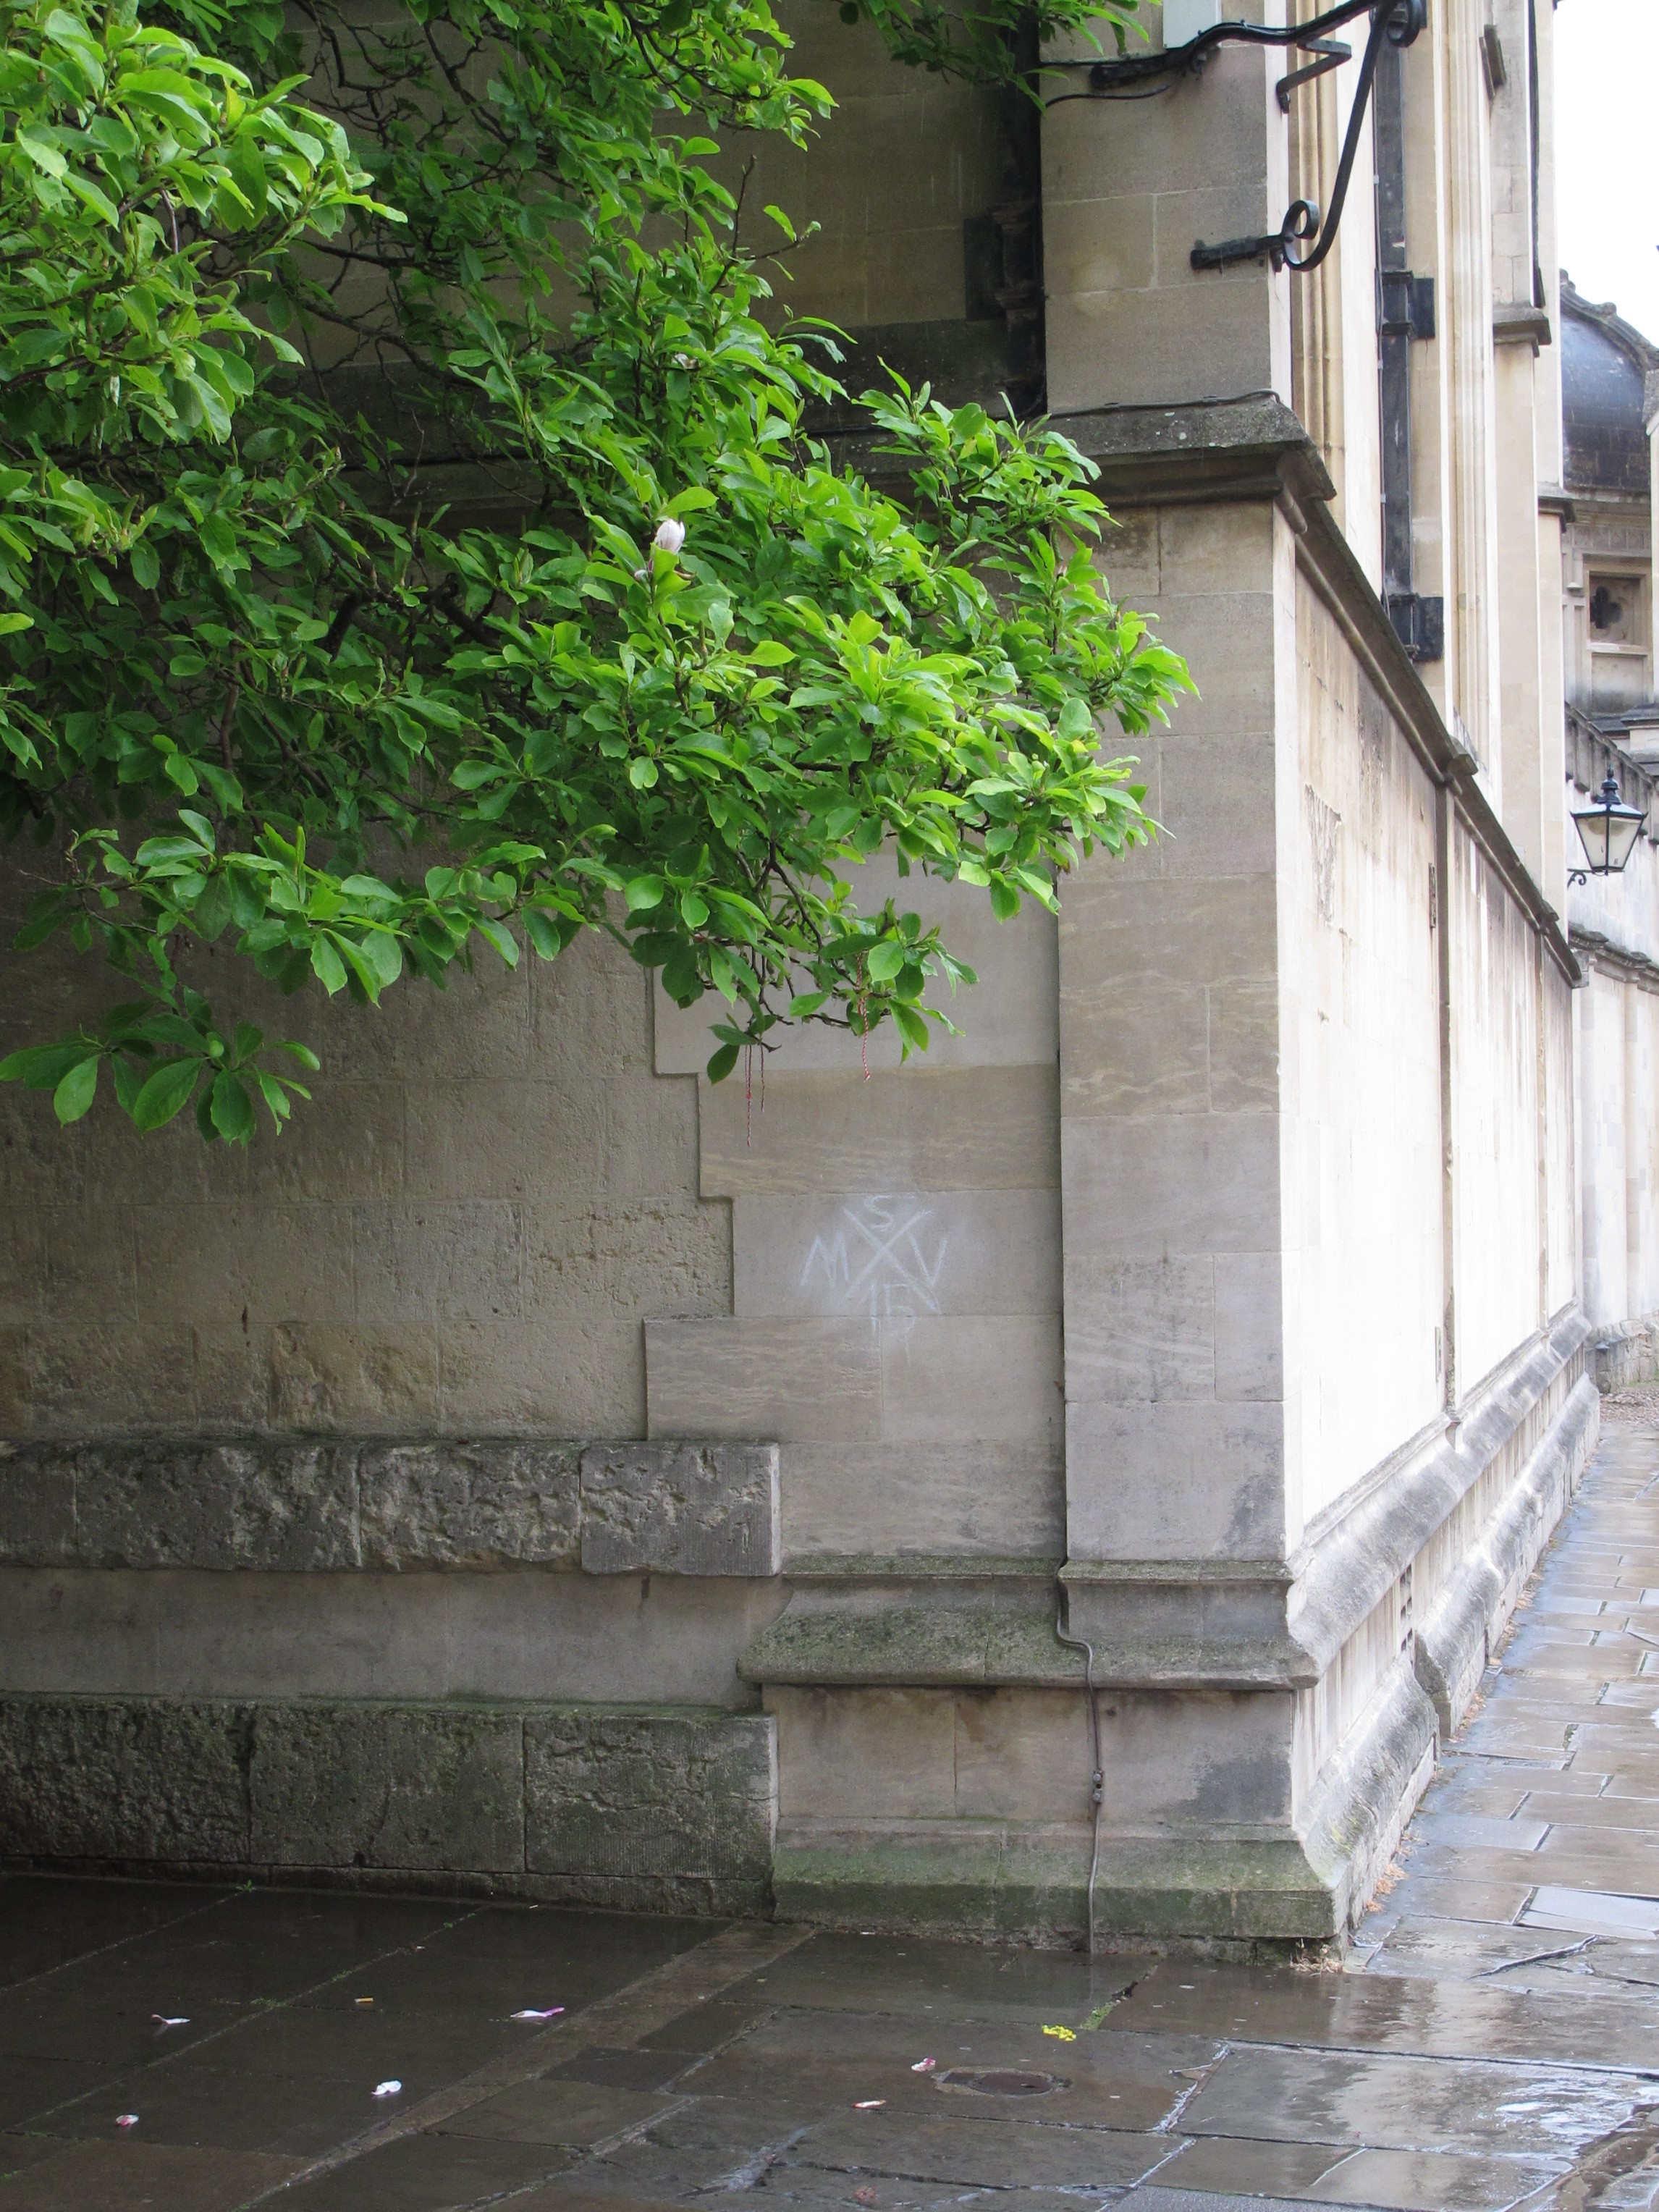 Corner of building at the end of Catte St. looking into Radcliffe Square, with scuffed chalk mark visible on the wall